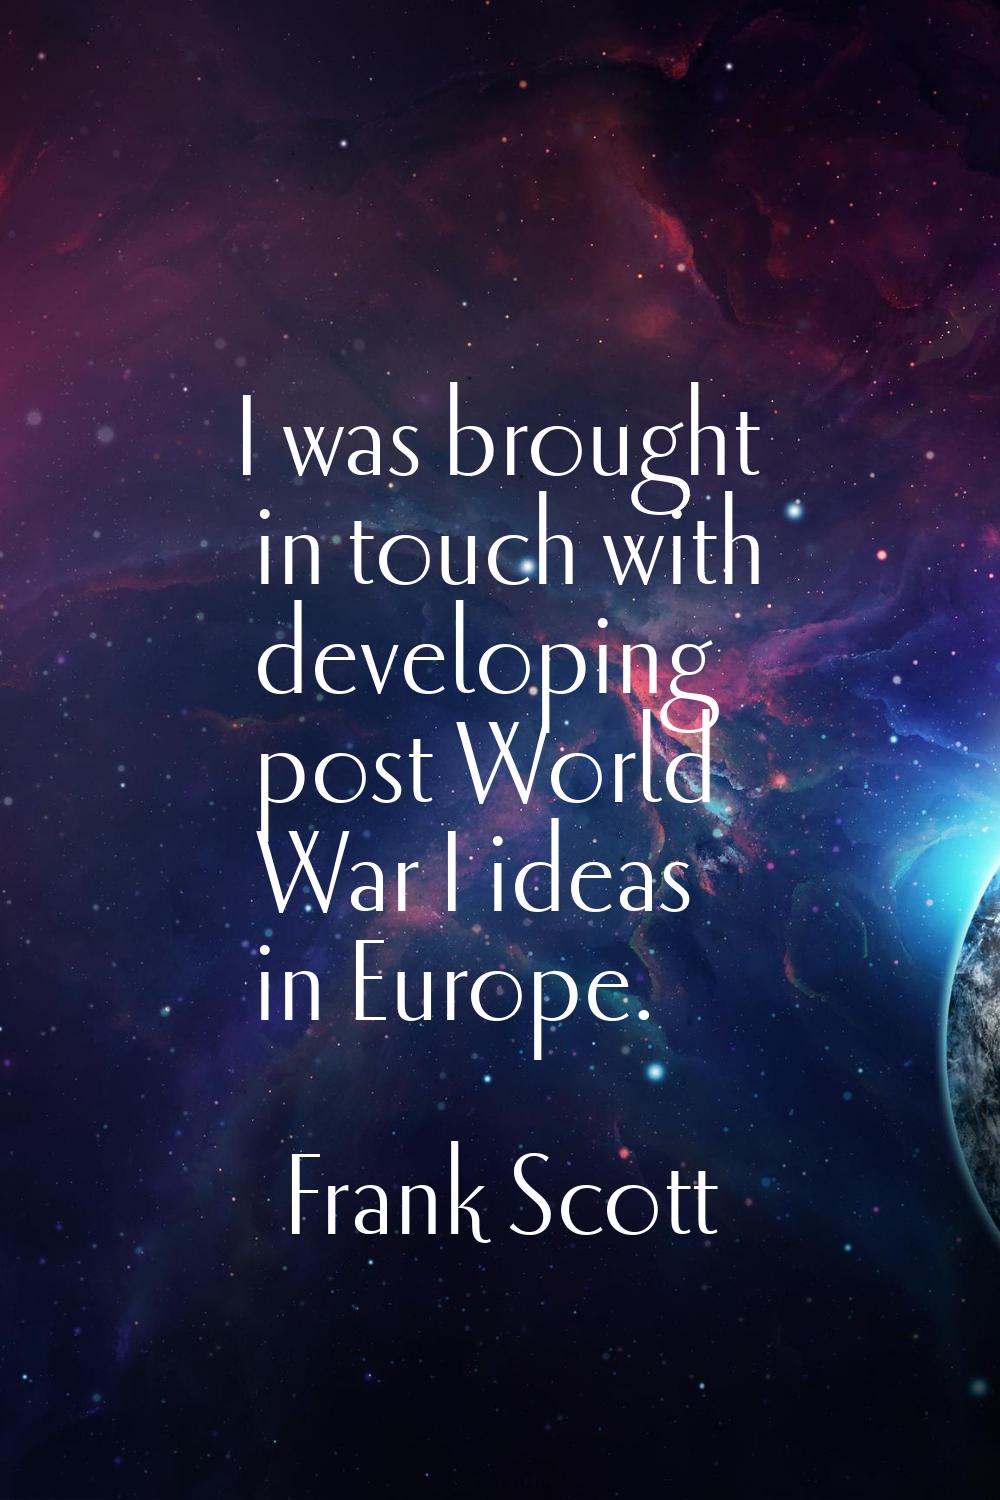 I was brought in touch with developing post World War I ideas in Europe.